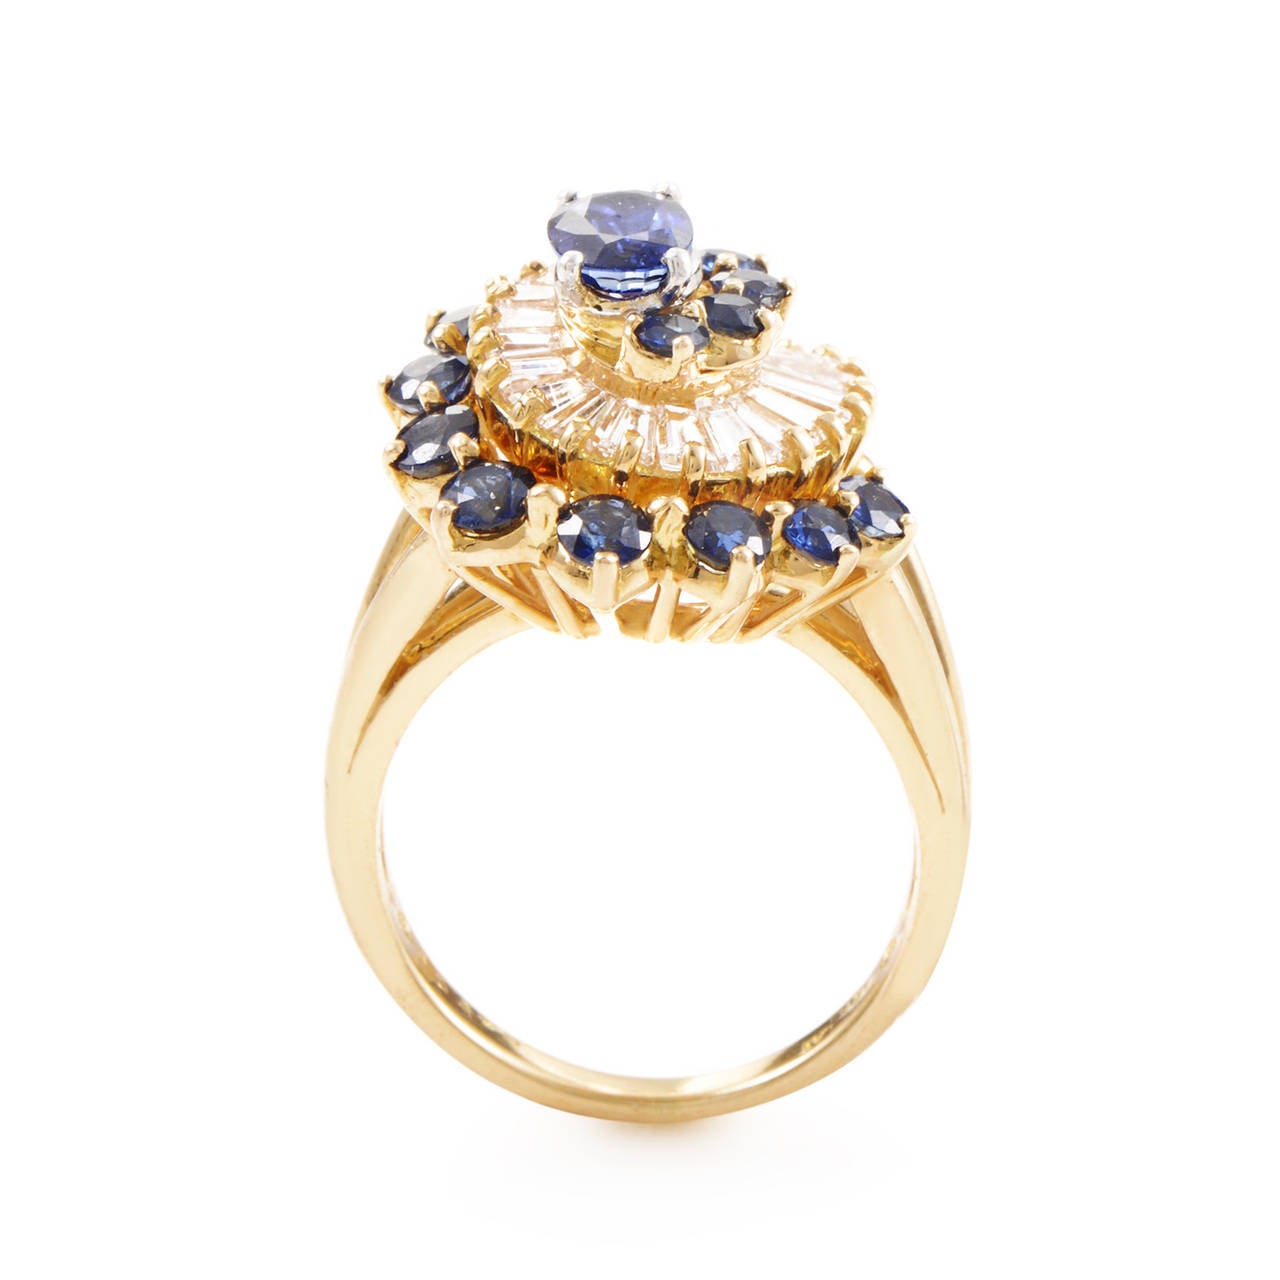 This uniquely designed Oscar Heyman ring is an absolute delight to wear as well as to behold. The ring is made from 18K yellow gold with platinum prongs that hold the blue sapphire main stone in place. 1.20 carats of sapphires combined with 2.50